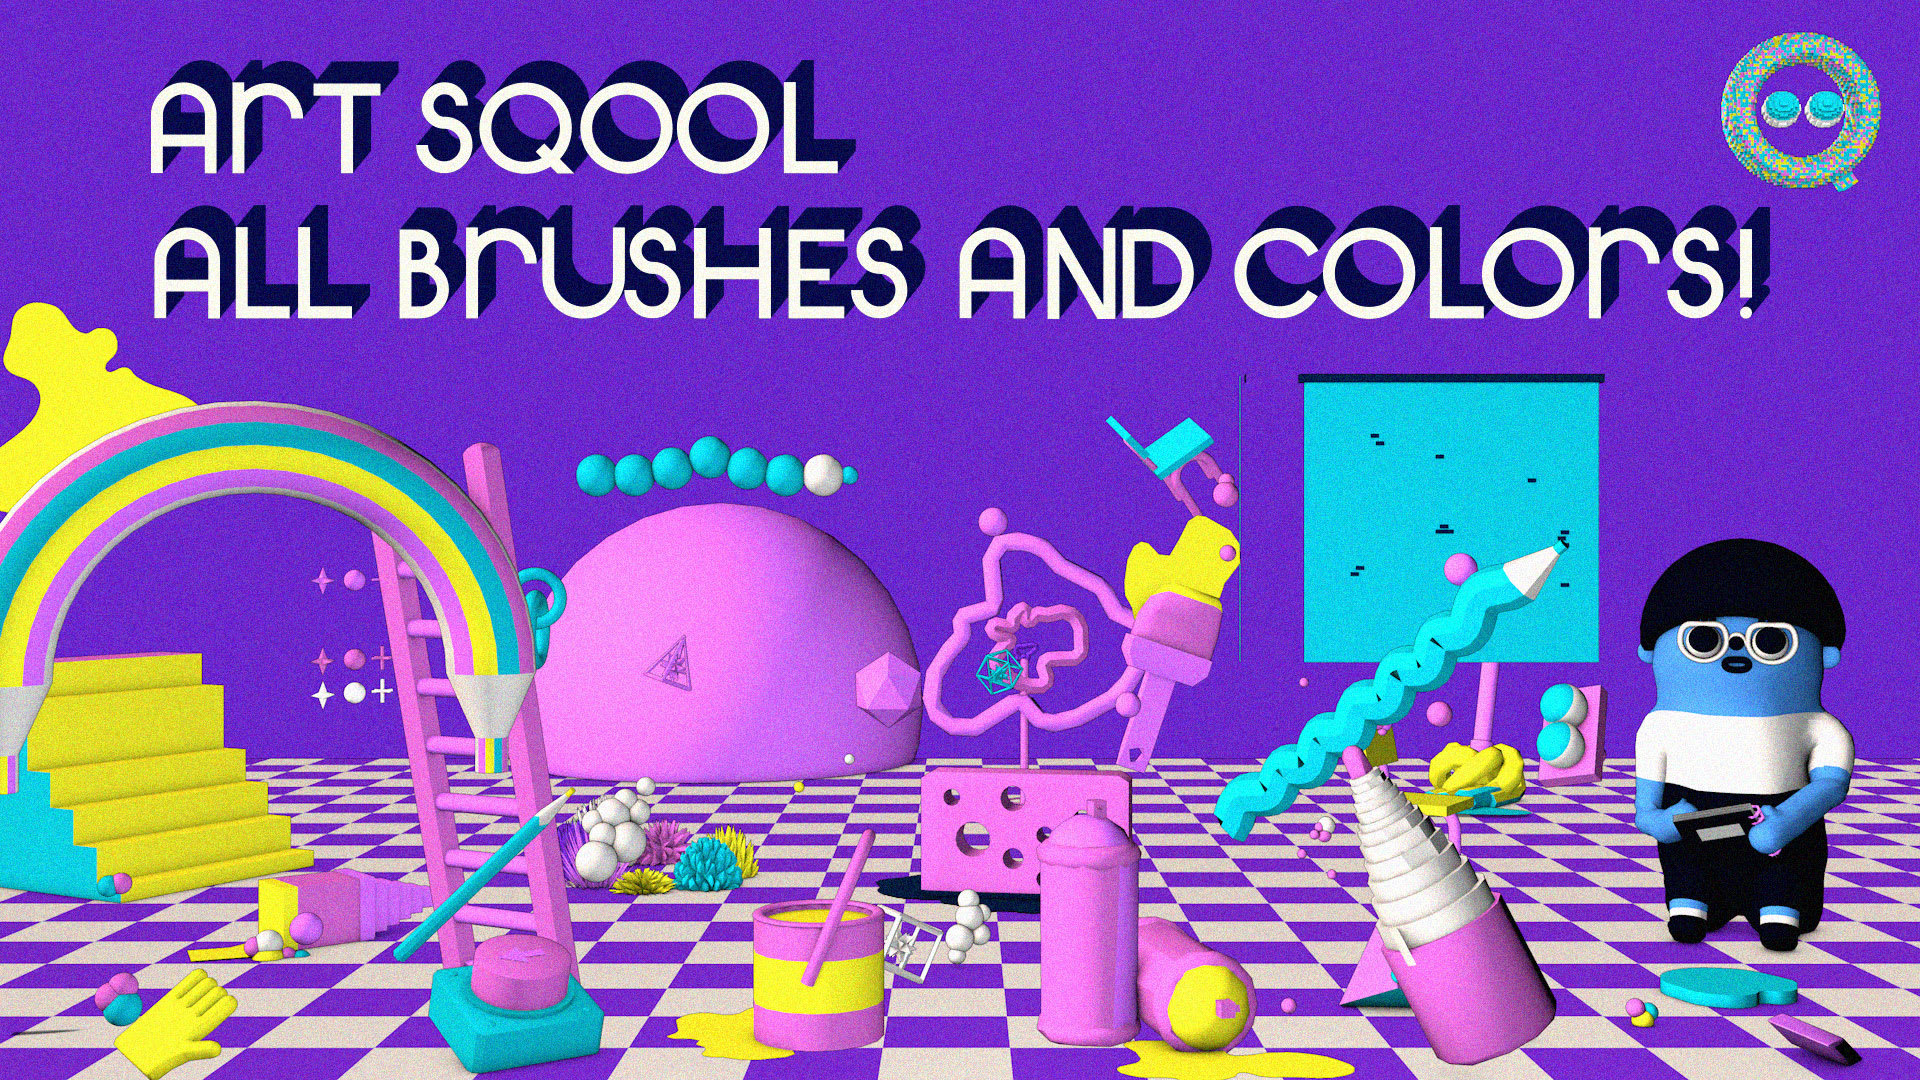 Art Sqool - All Brushes and Colors!